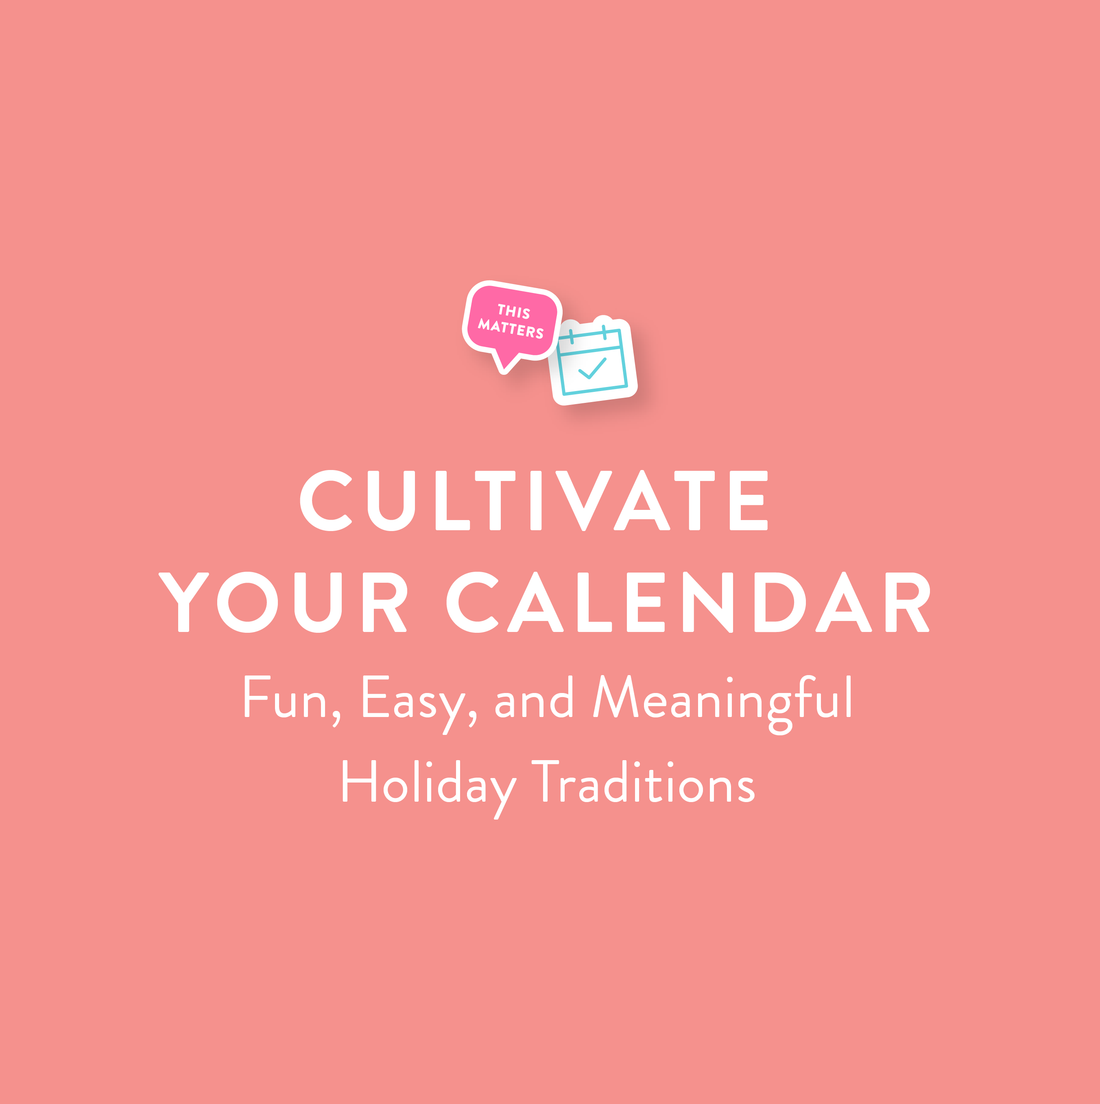 Cultivate Your Calendar: Fun, Easy, and Meaningful Holiday Traditions